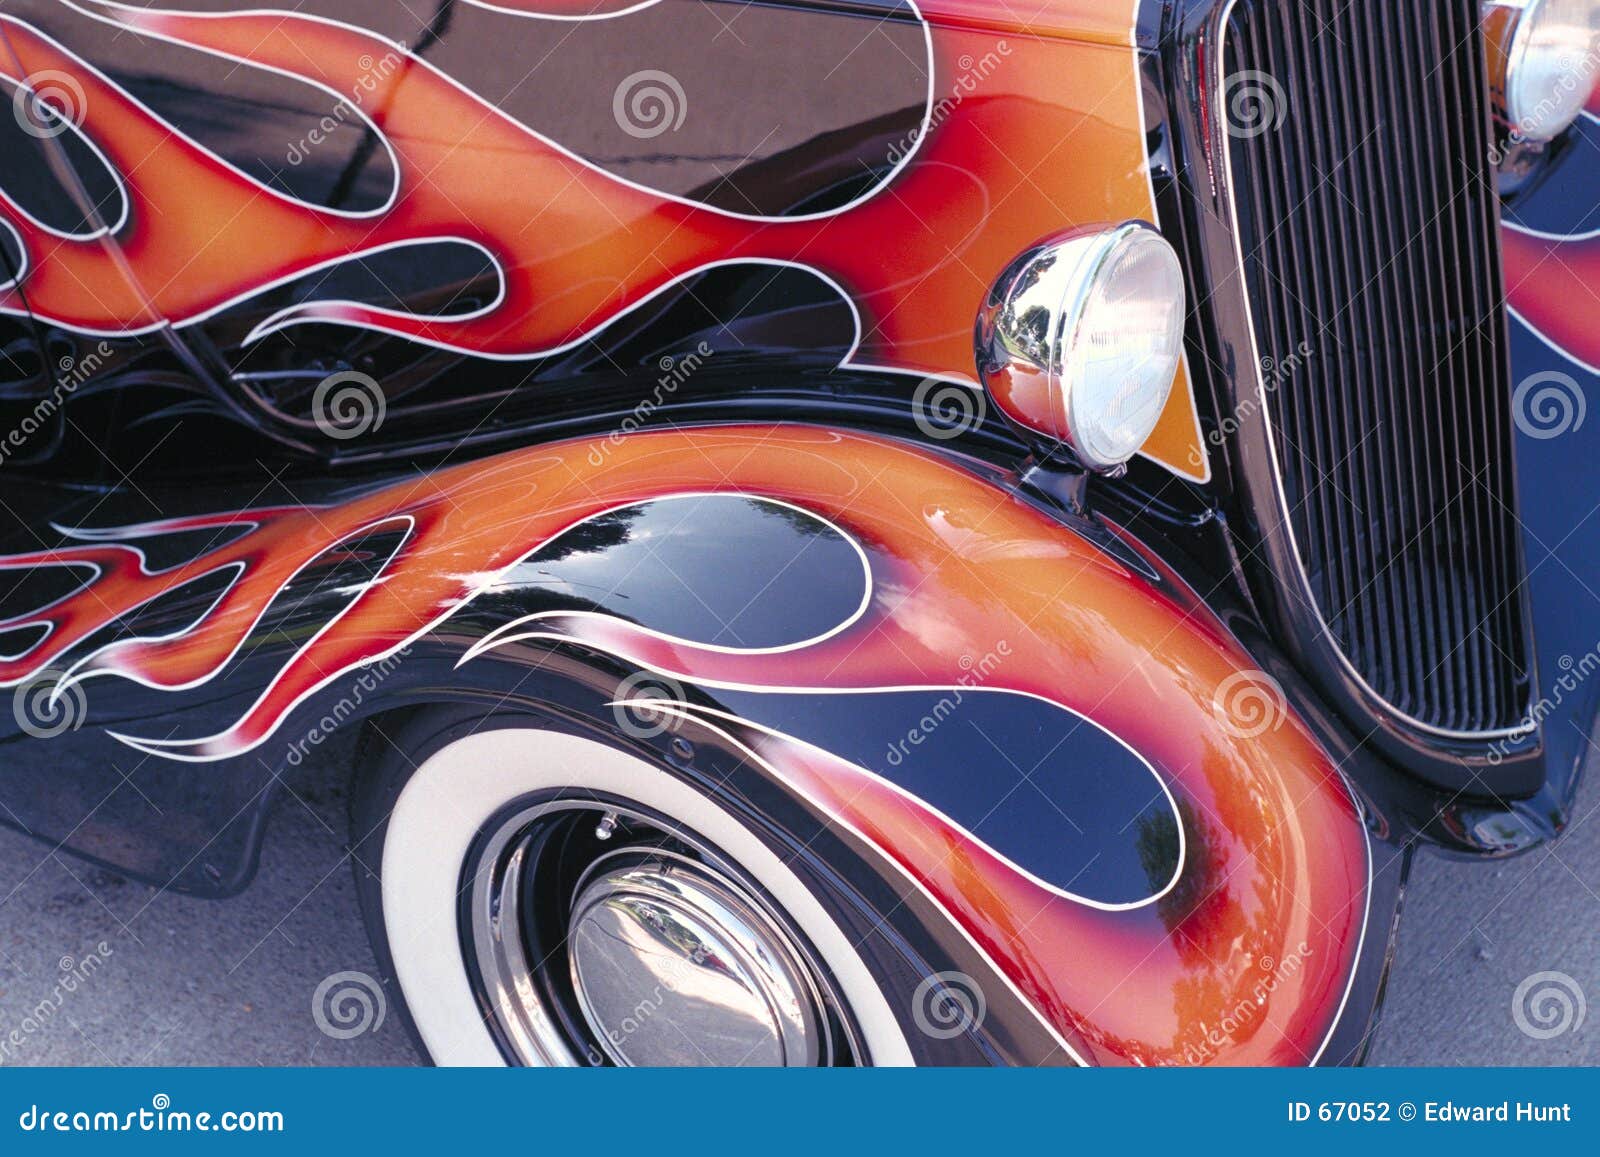 Classic Cars with Flames